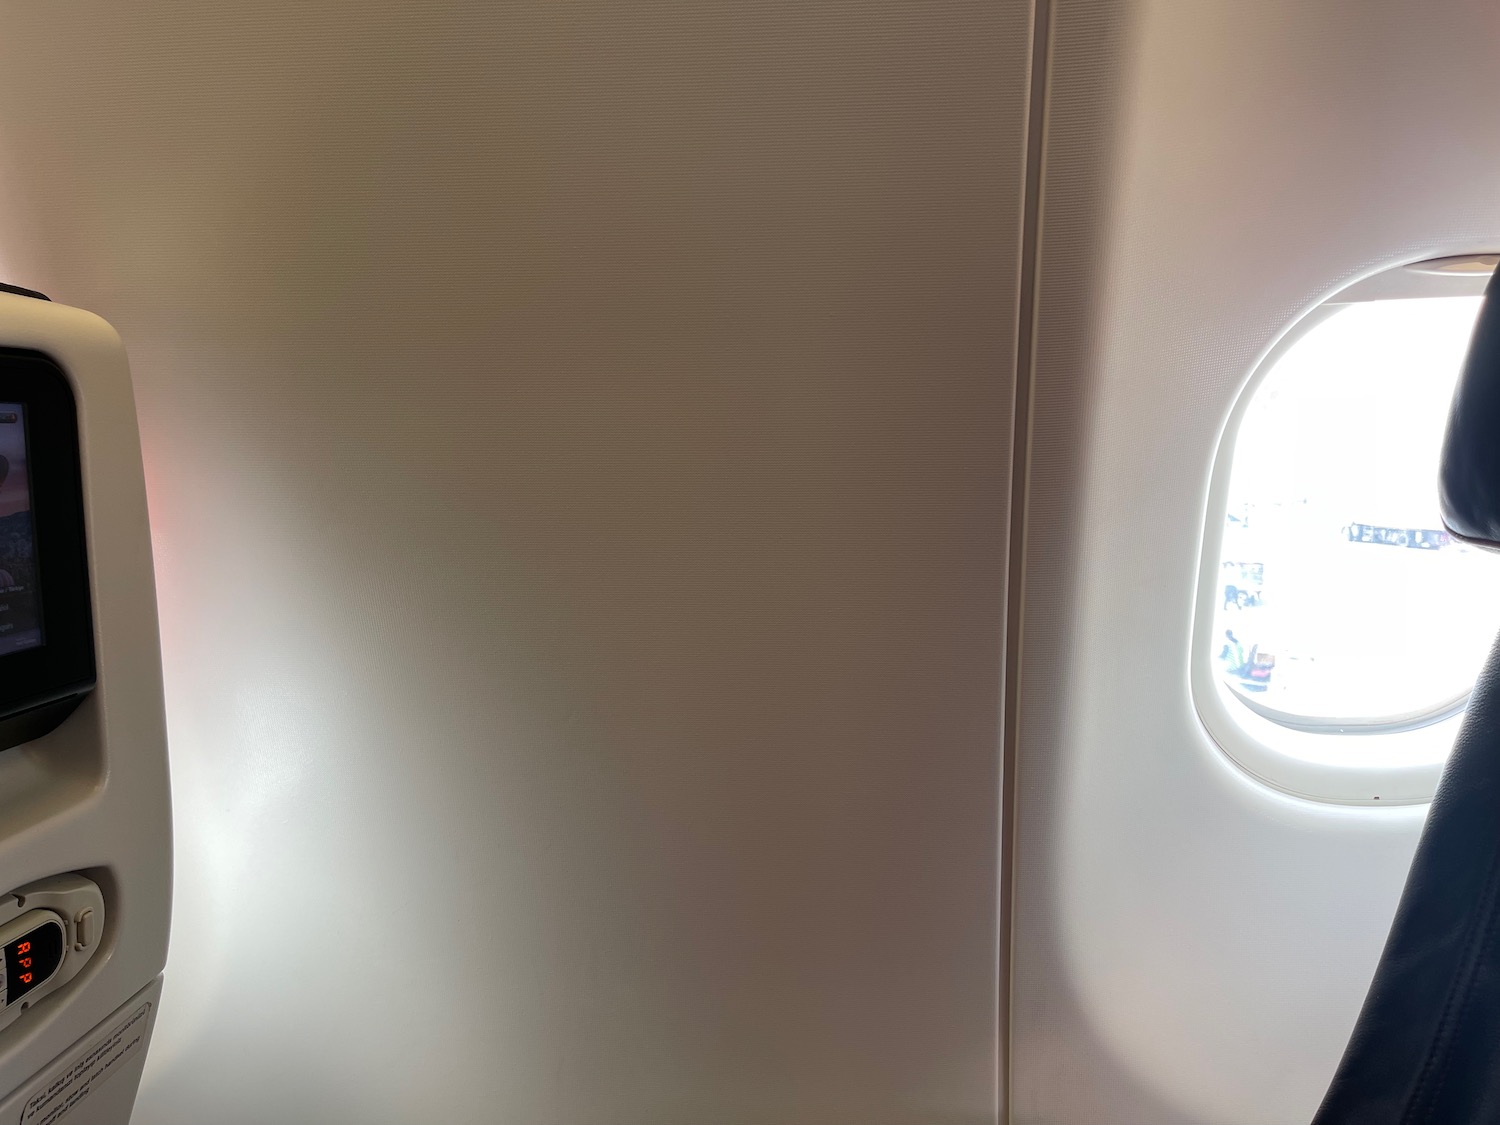 a window in an airplane